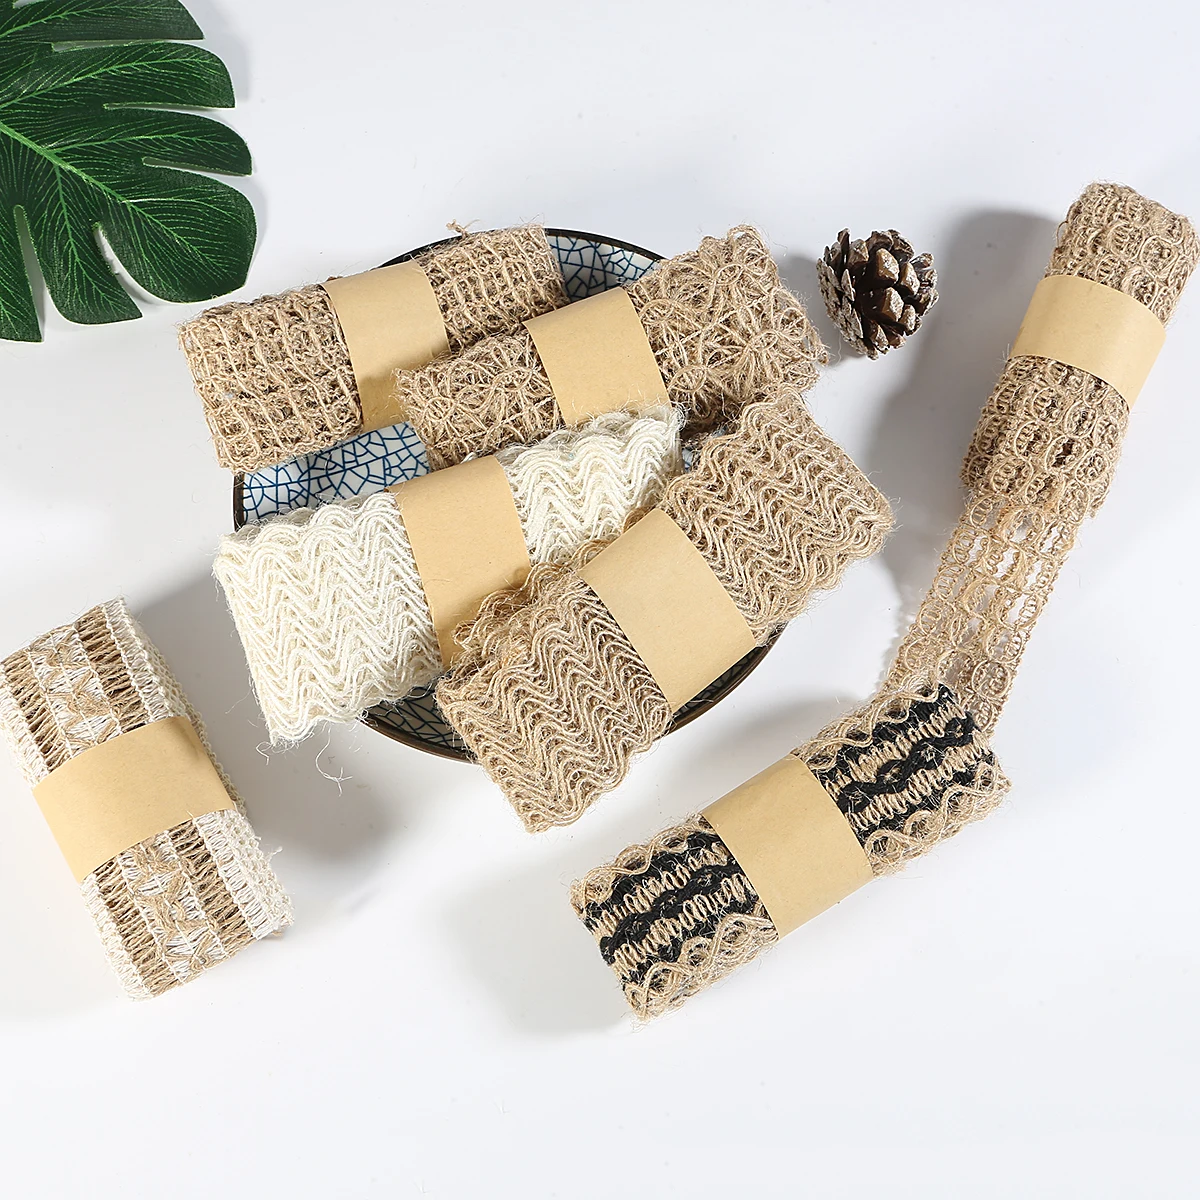 

Burlap Flat Cords Hessian Vintage Rustic Hemp Jute Rope Christmas Wedding Party Centerpieces Decoration Gift Wrapping Ribbons